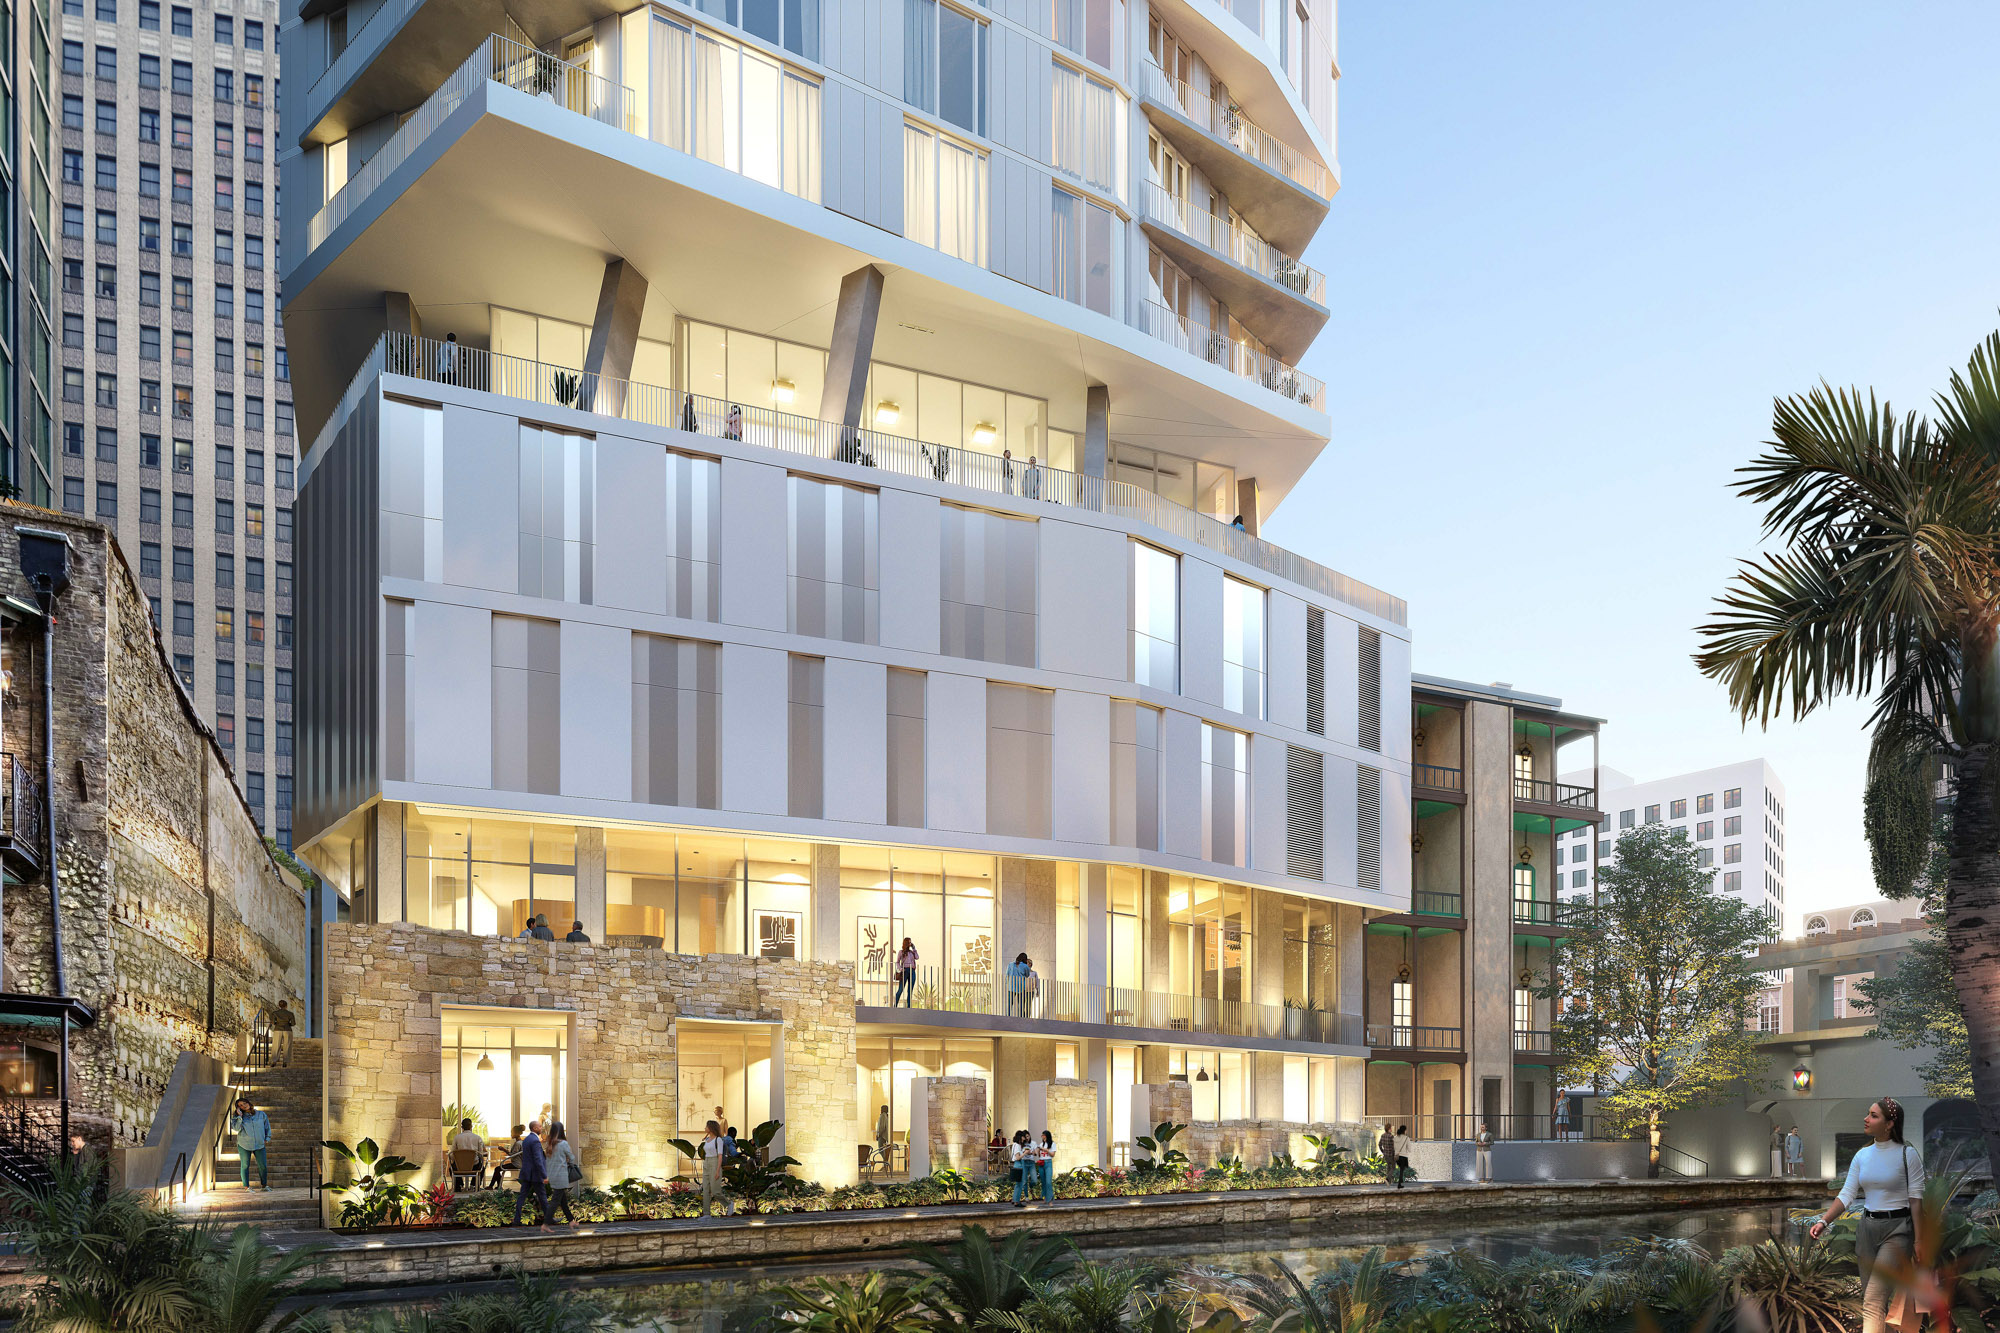 Floodgate tower along San Antonio River Walk to open in spring 2023